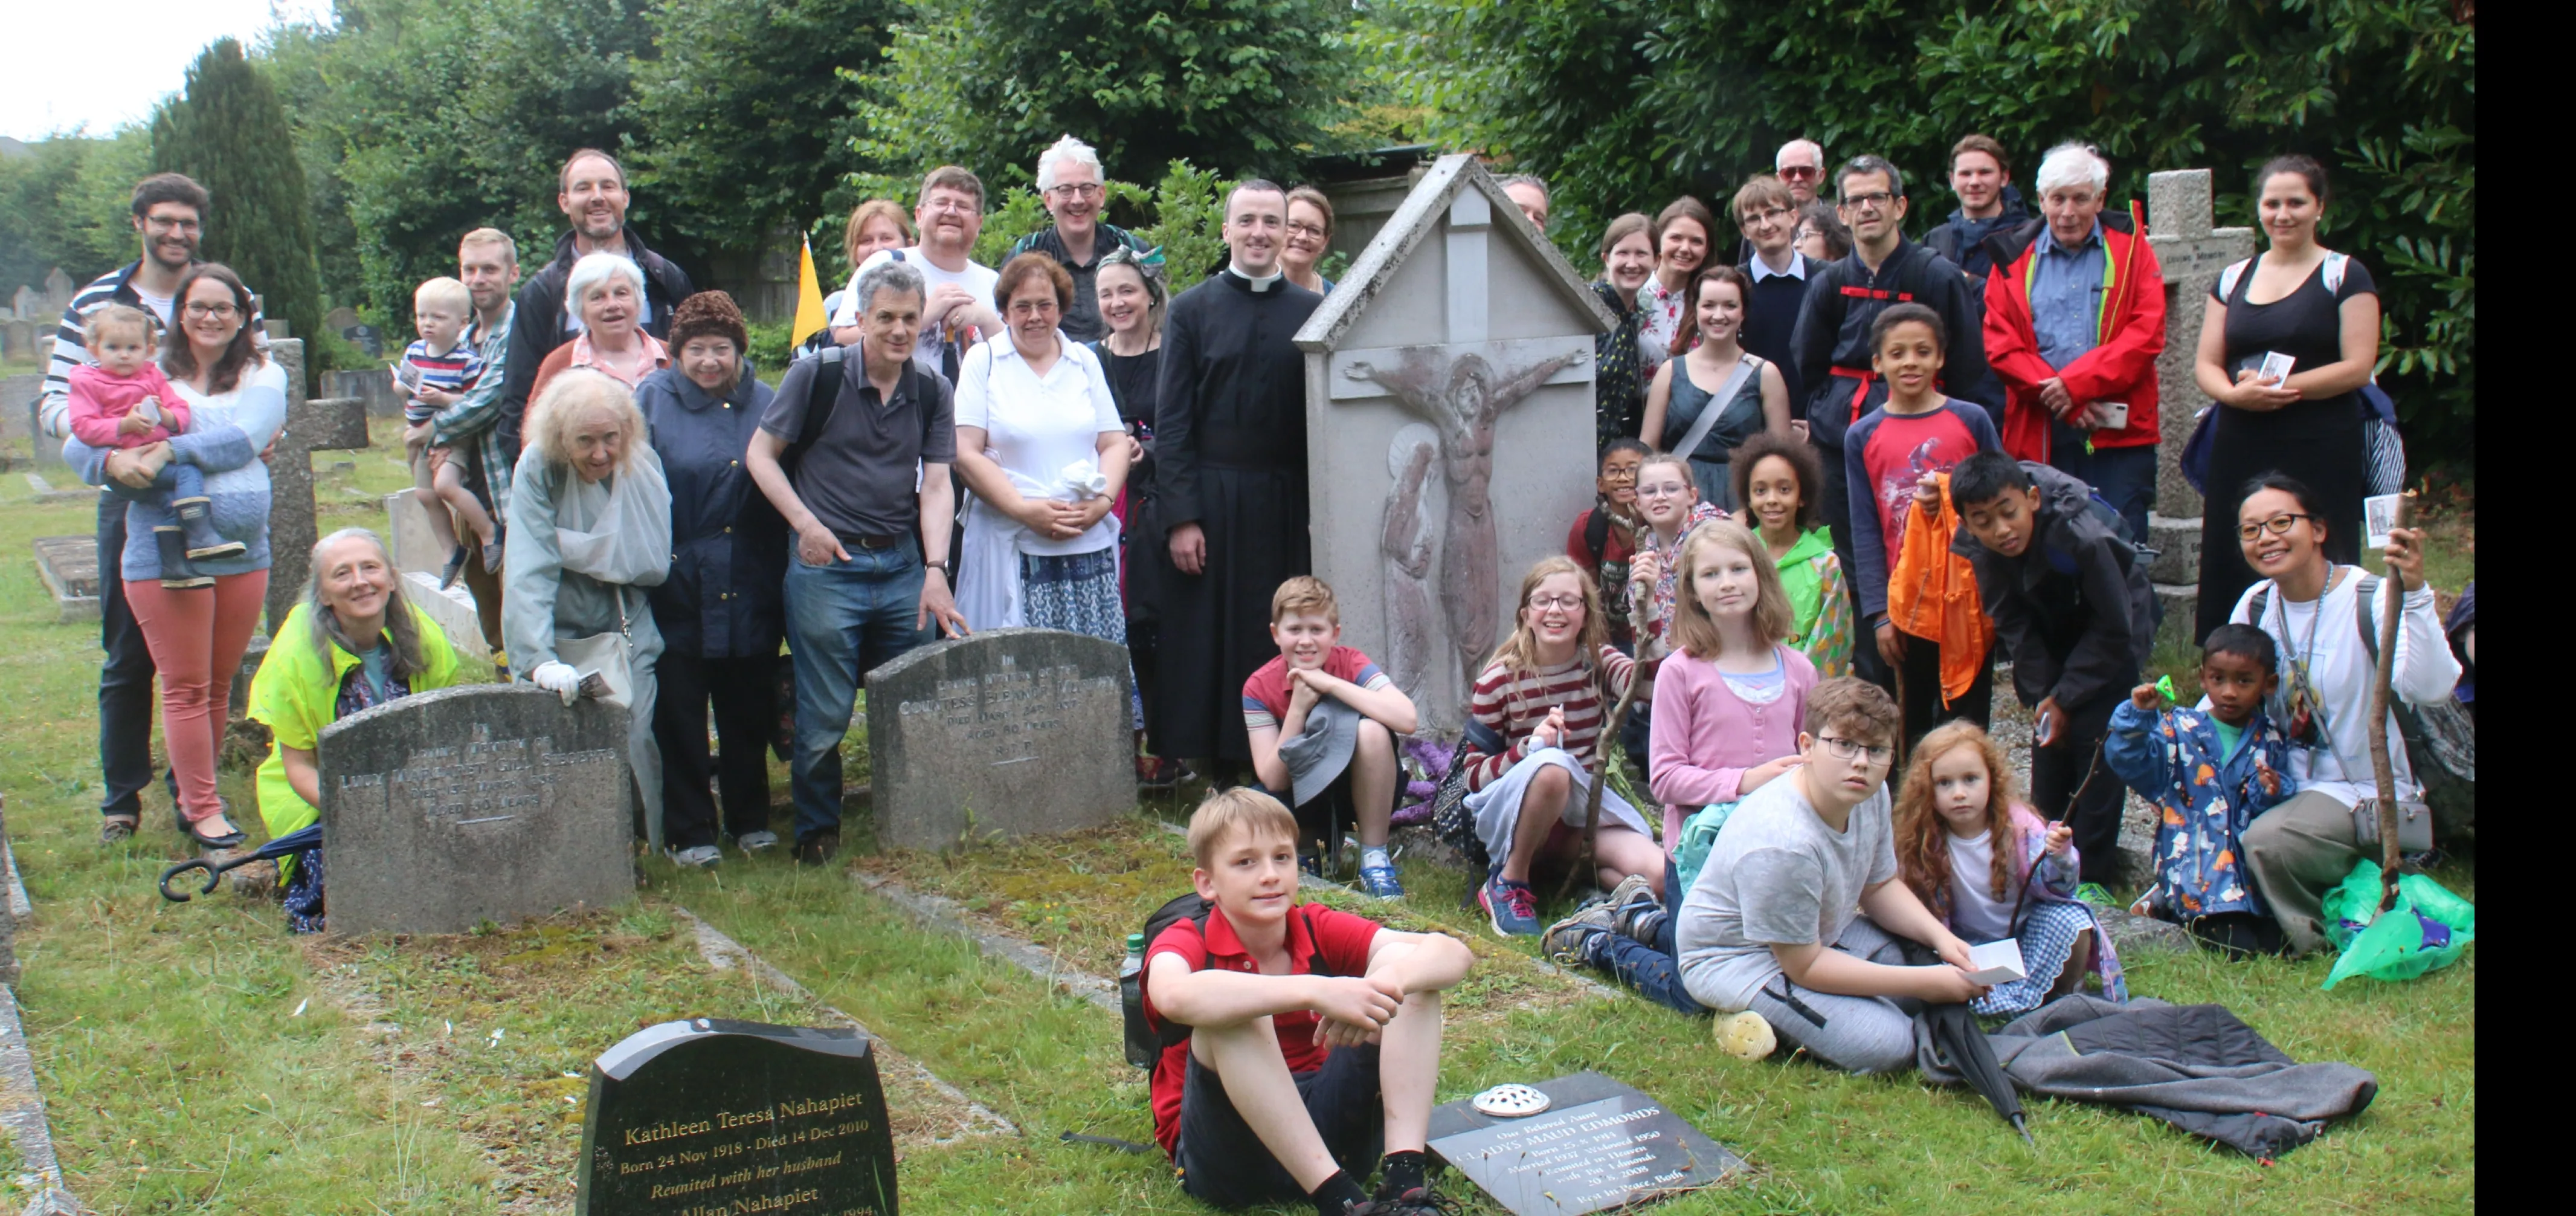 Pilgrims gather around Chesterton’s grave at Beaconsfield during July 25, 2020 pilgrimage?w=200&h=150